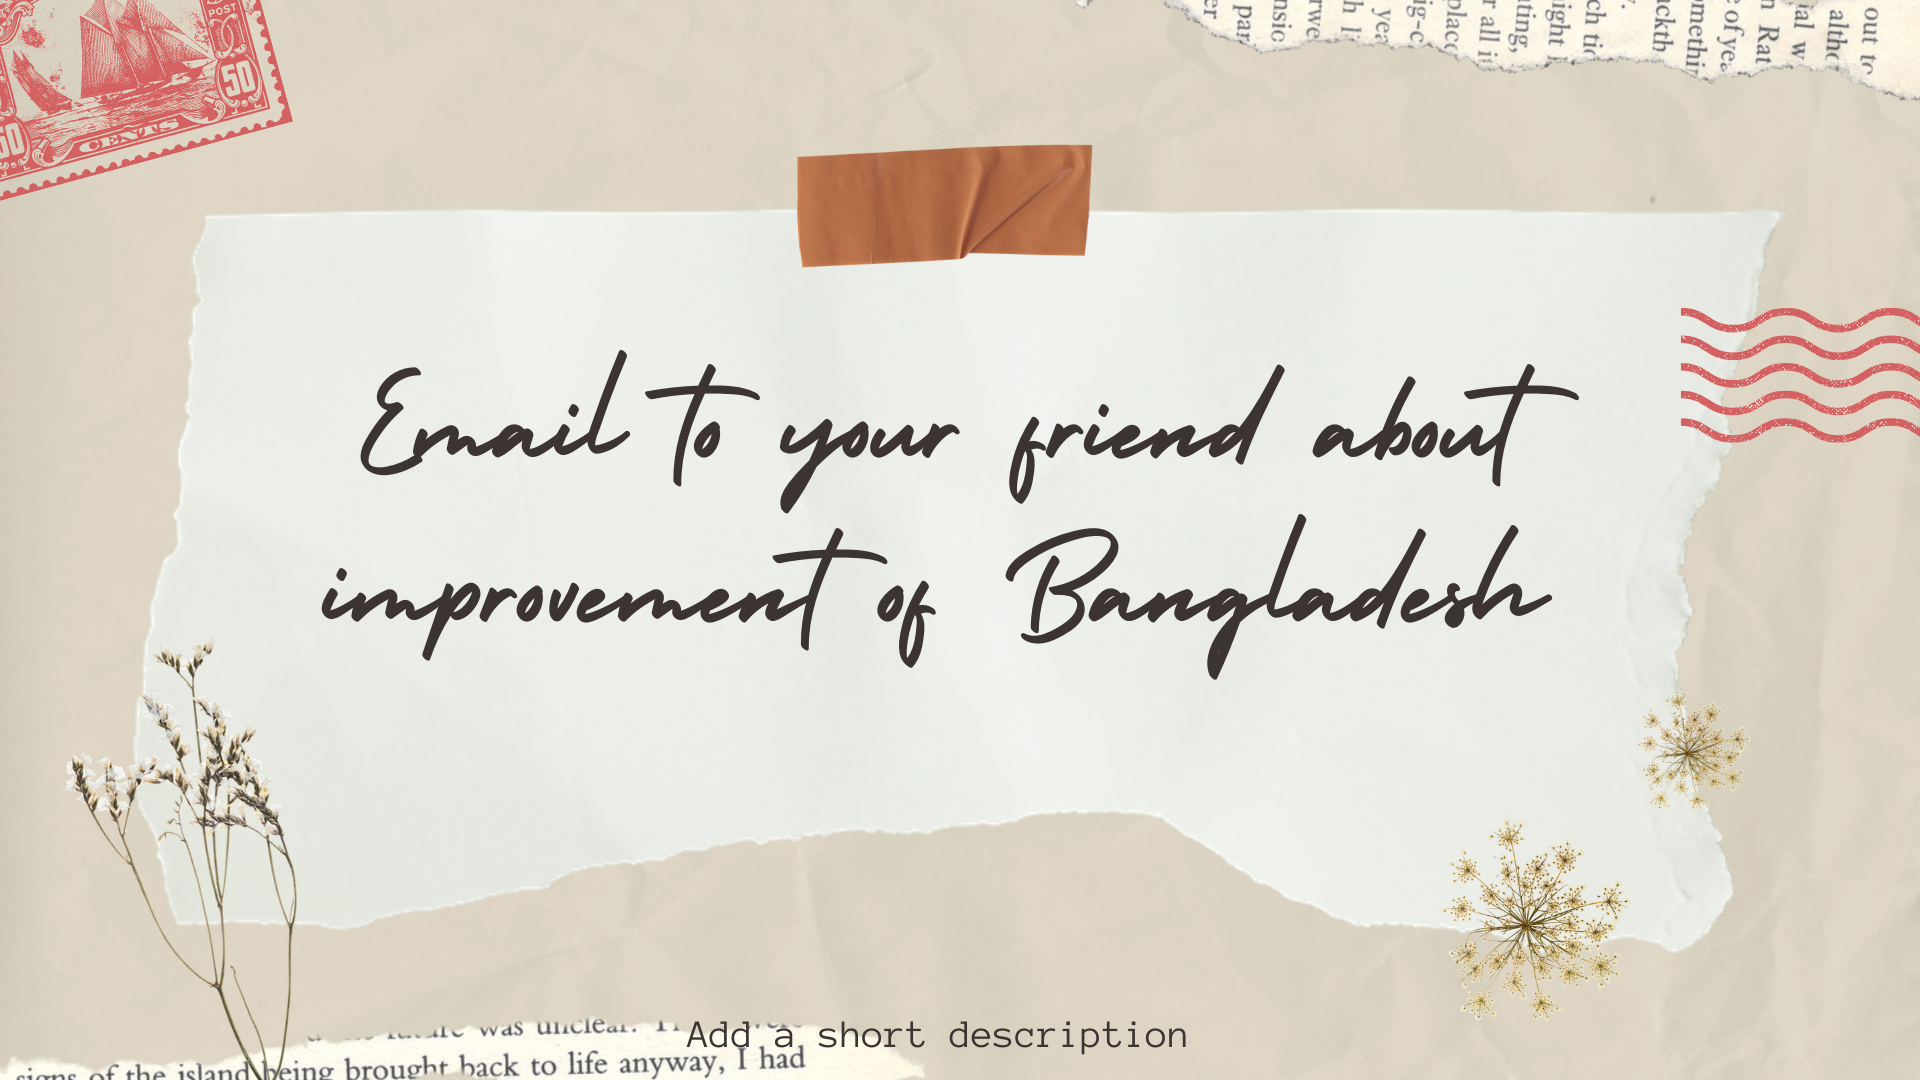 Email to your friend about improvement of Bangladesh